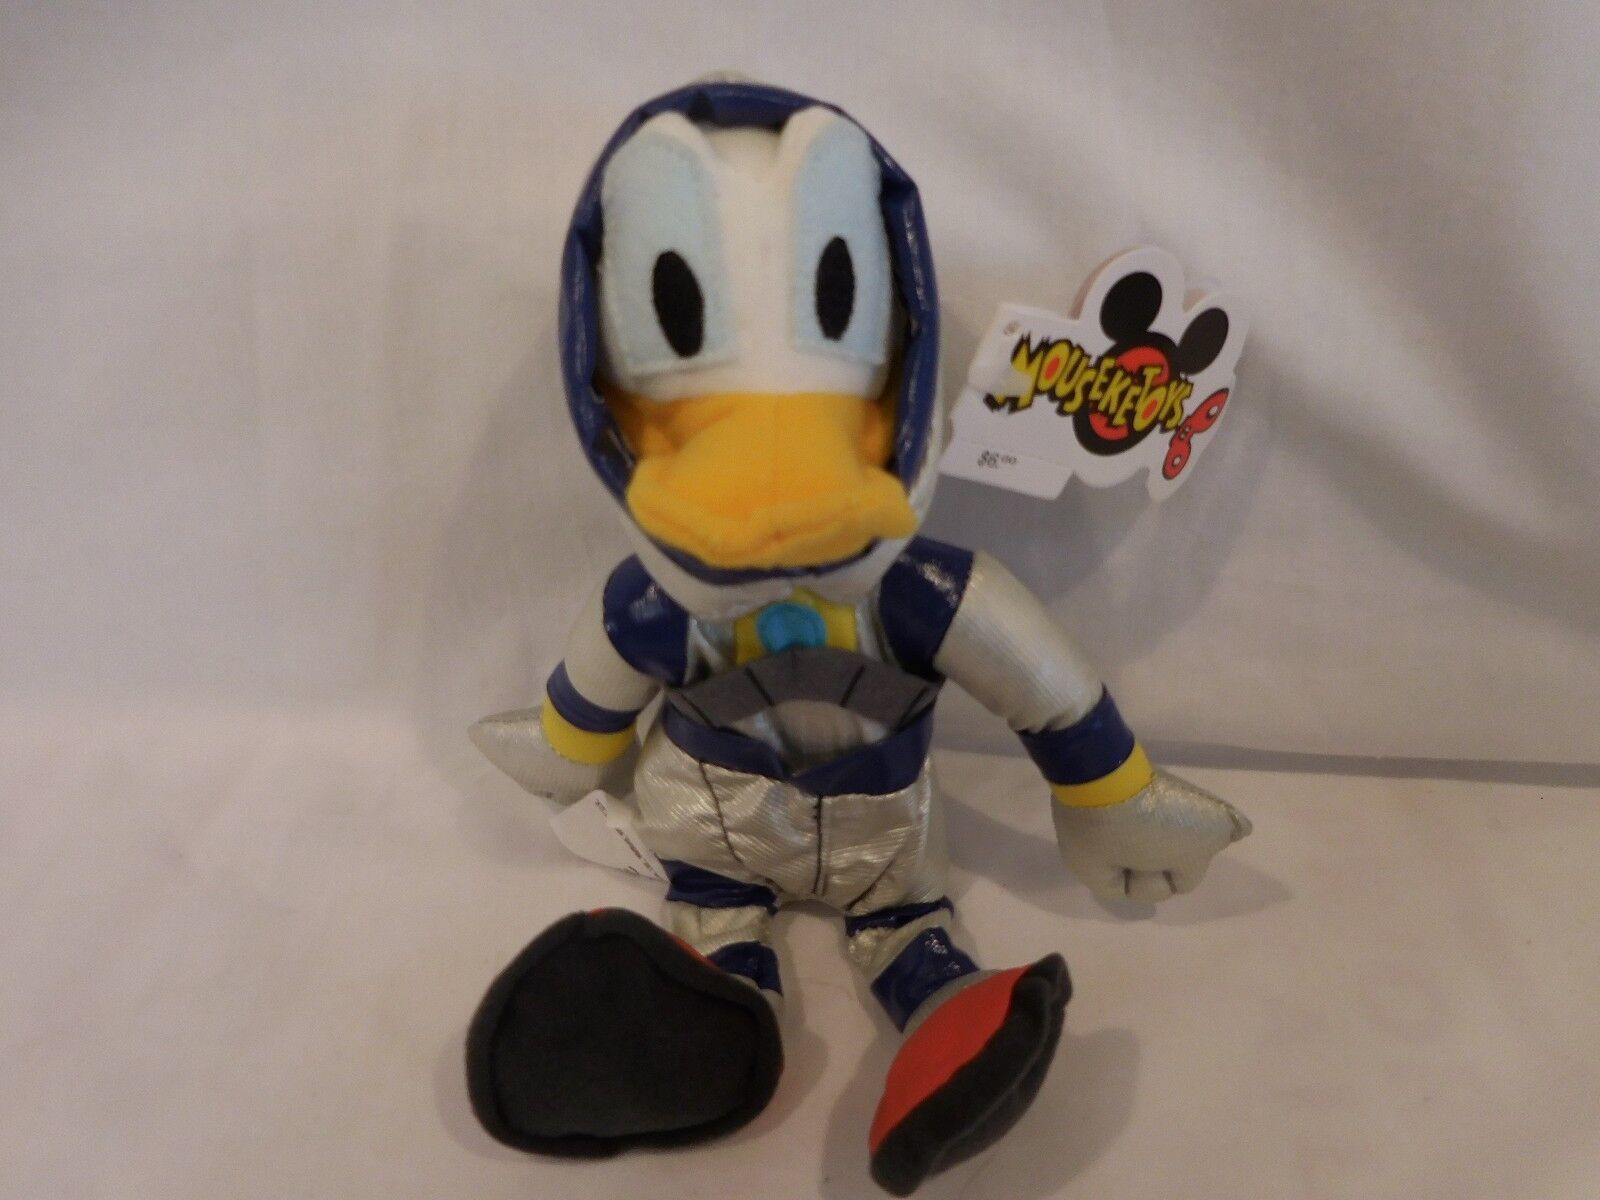 Primary image for Disney SPACE DONALD DUCK PLUSH BEANIE New w/ Tags RETIRED